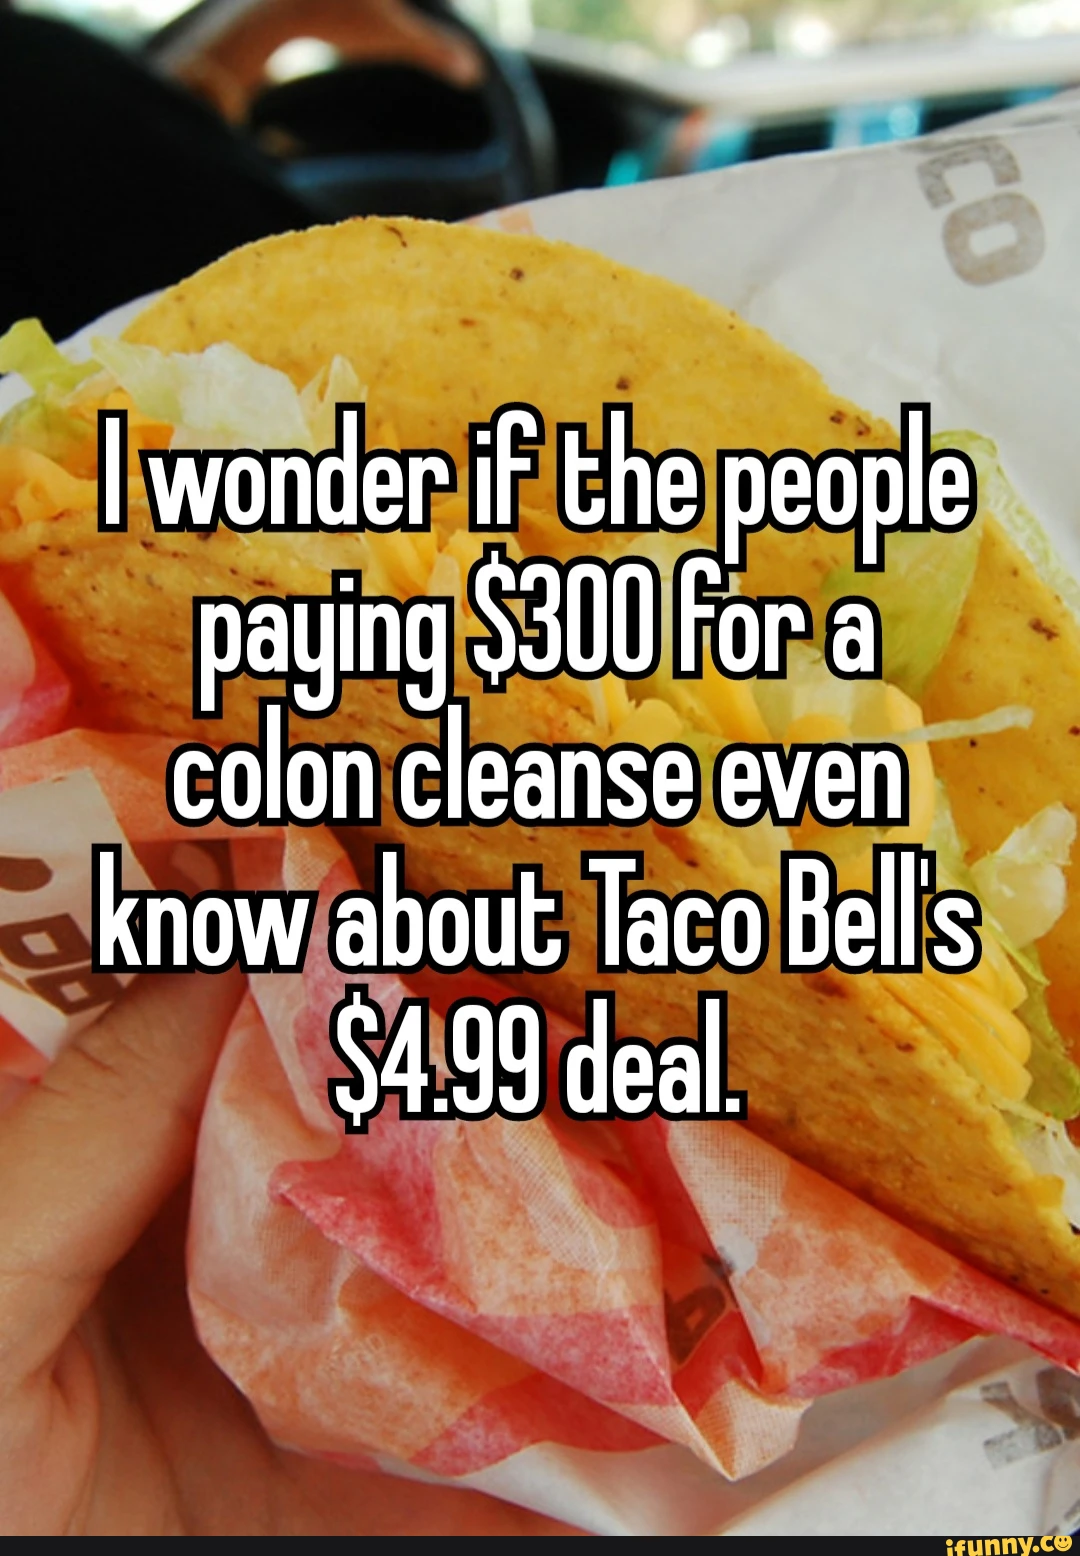 I wonder iF the people paying $300 For a colon cleanse even know about Taco Bell's $4.99 deal.